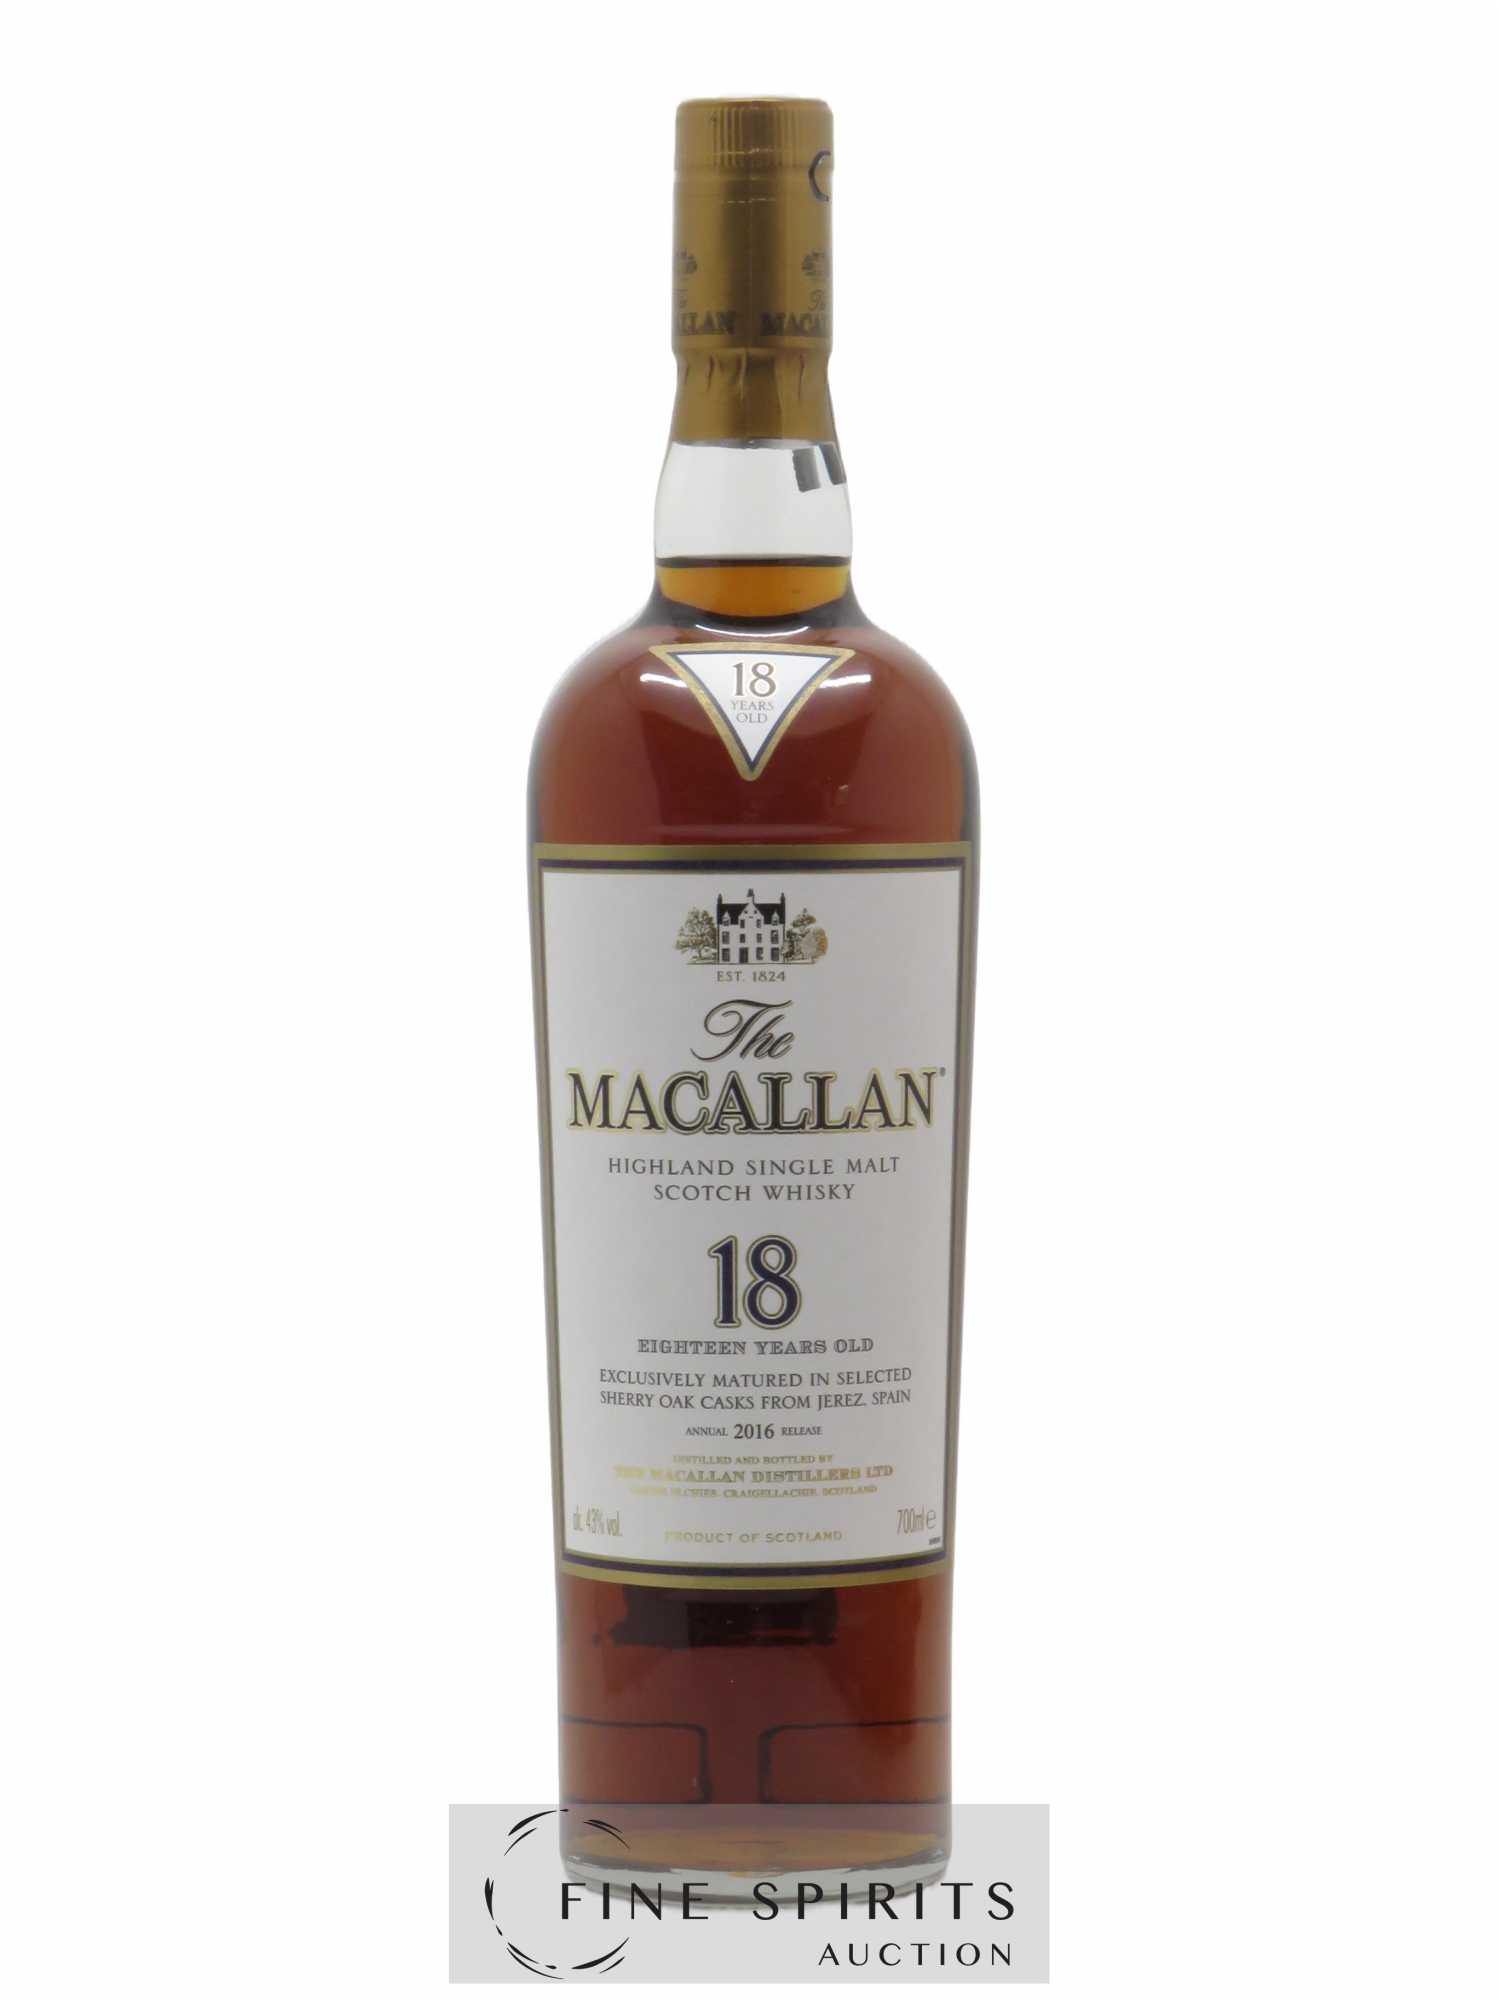 Macallan (The) 18 years Of. Sherry Oak Casks from Jerez - Annual 2016 Release